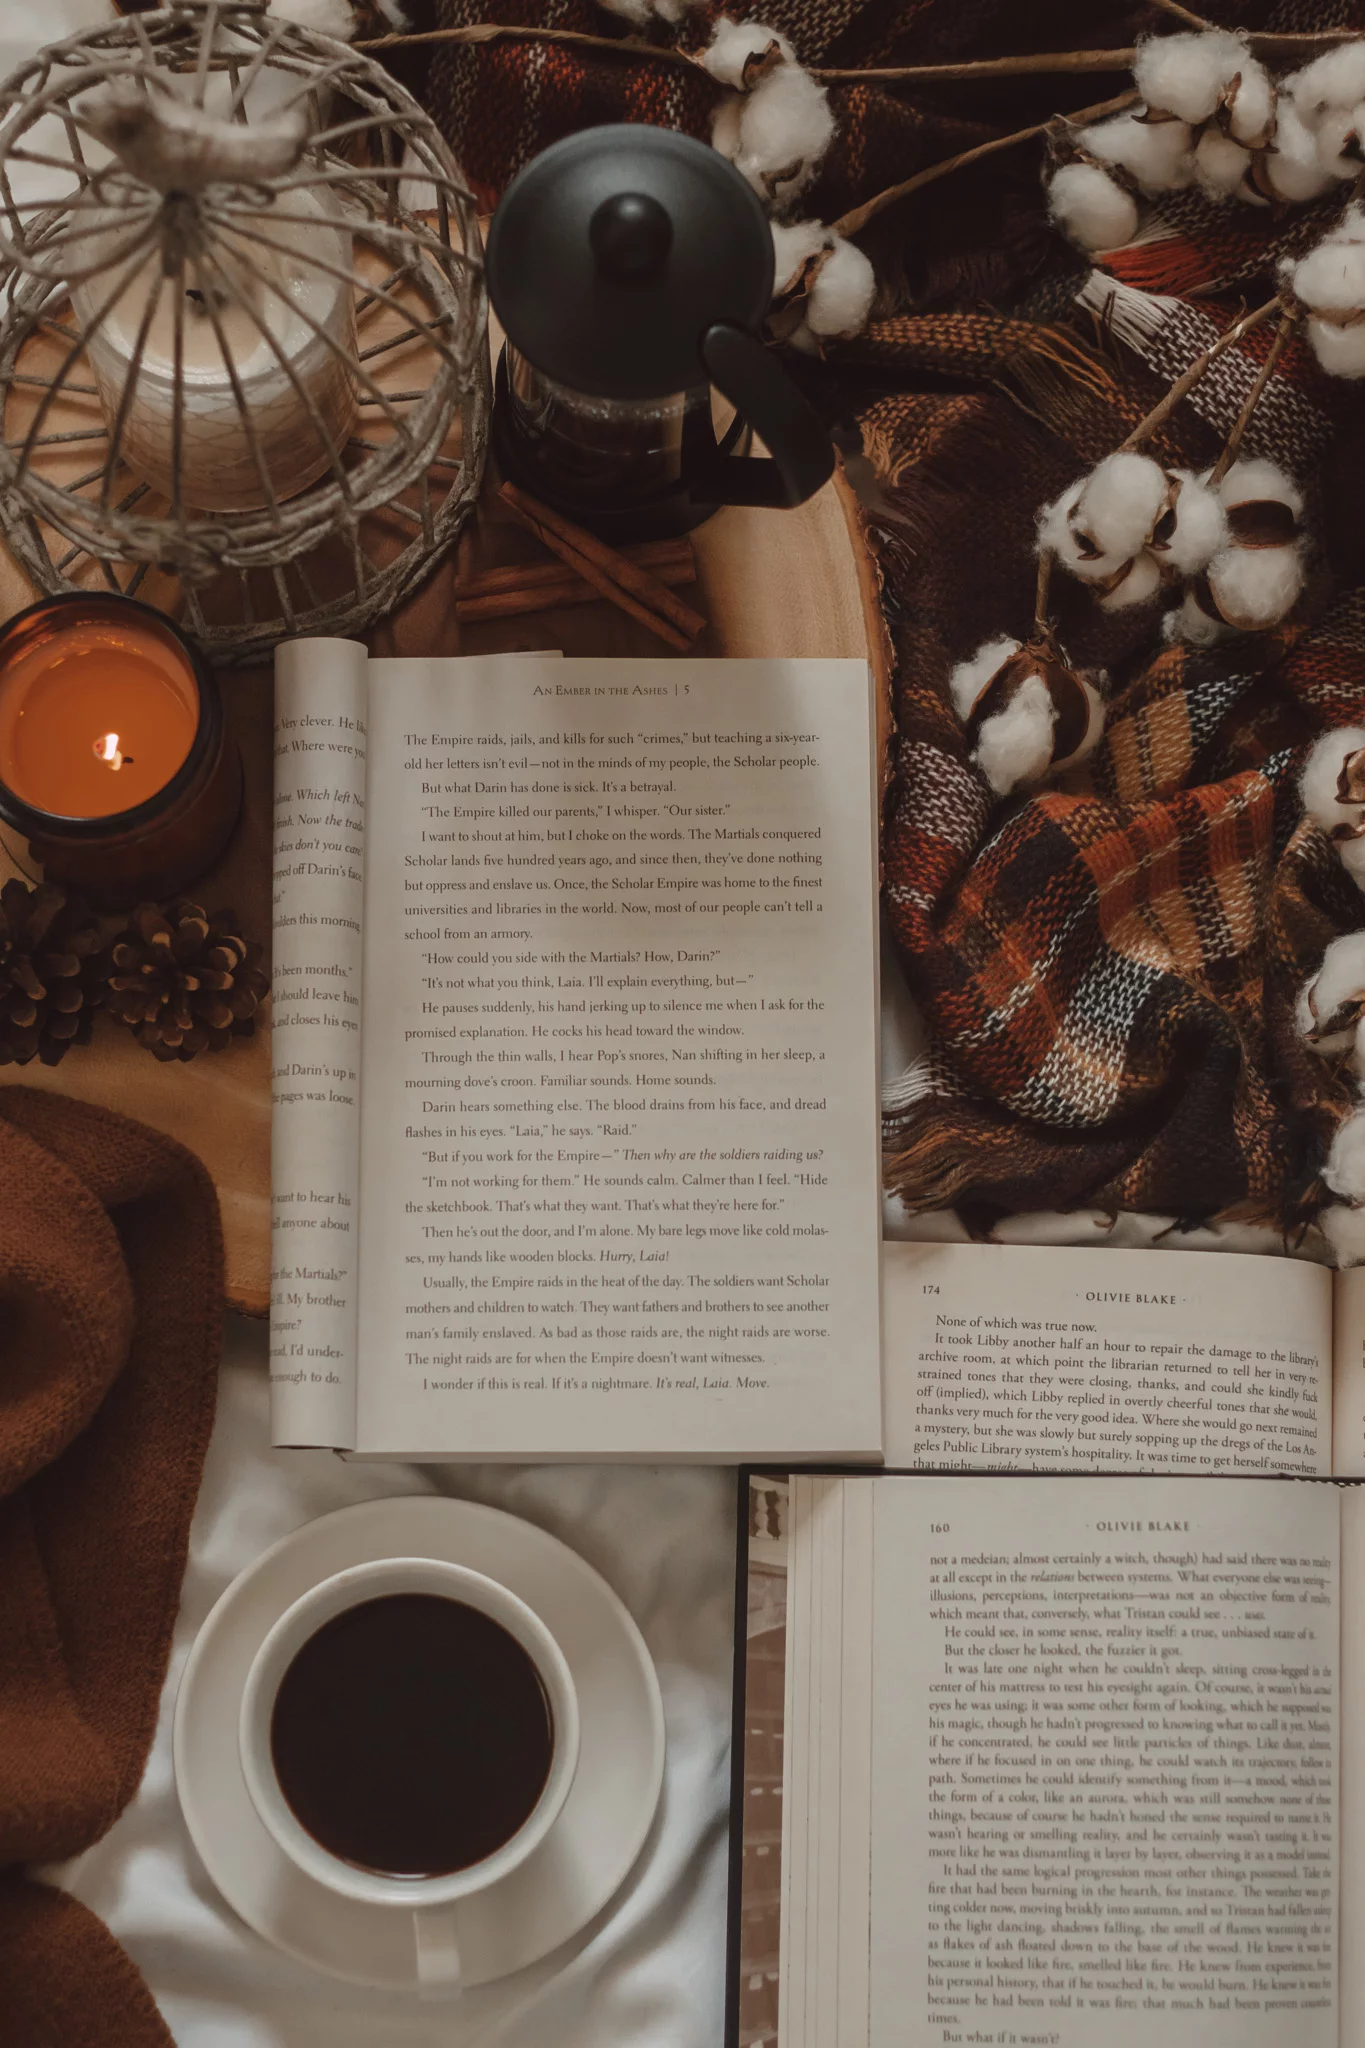 Why “Bookshops & Bonedust” is the Next Cozy Fantasy You Need to Read by The Espresso Edition cozy bookish blog